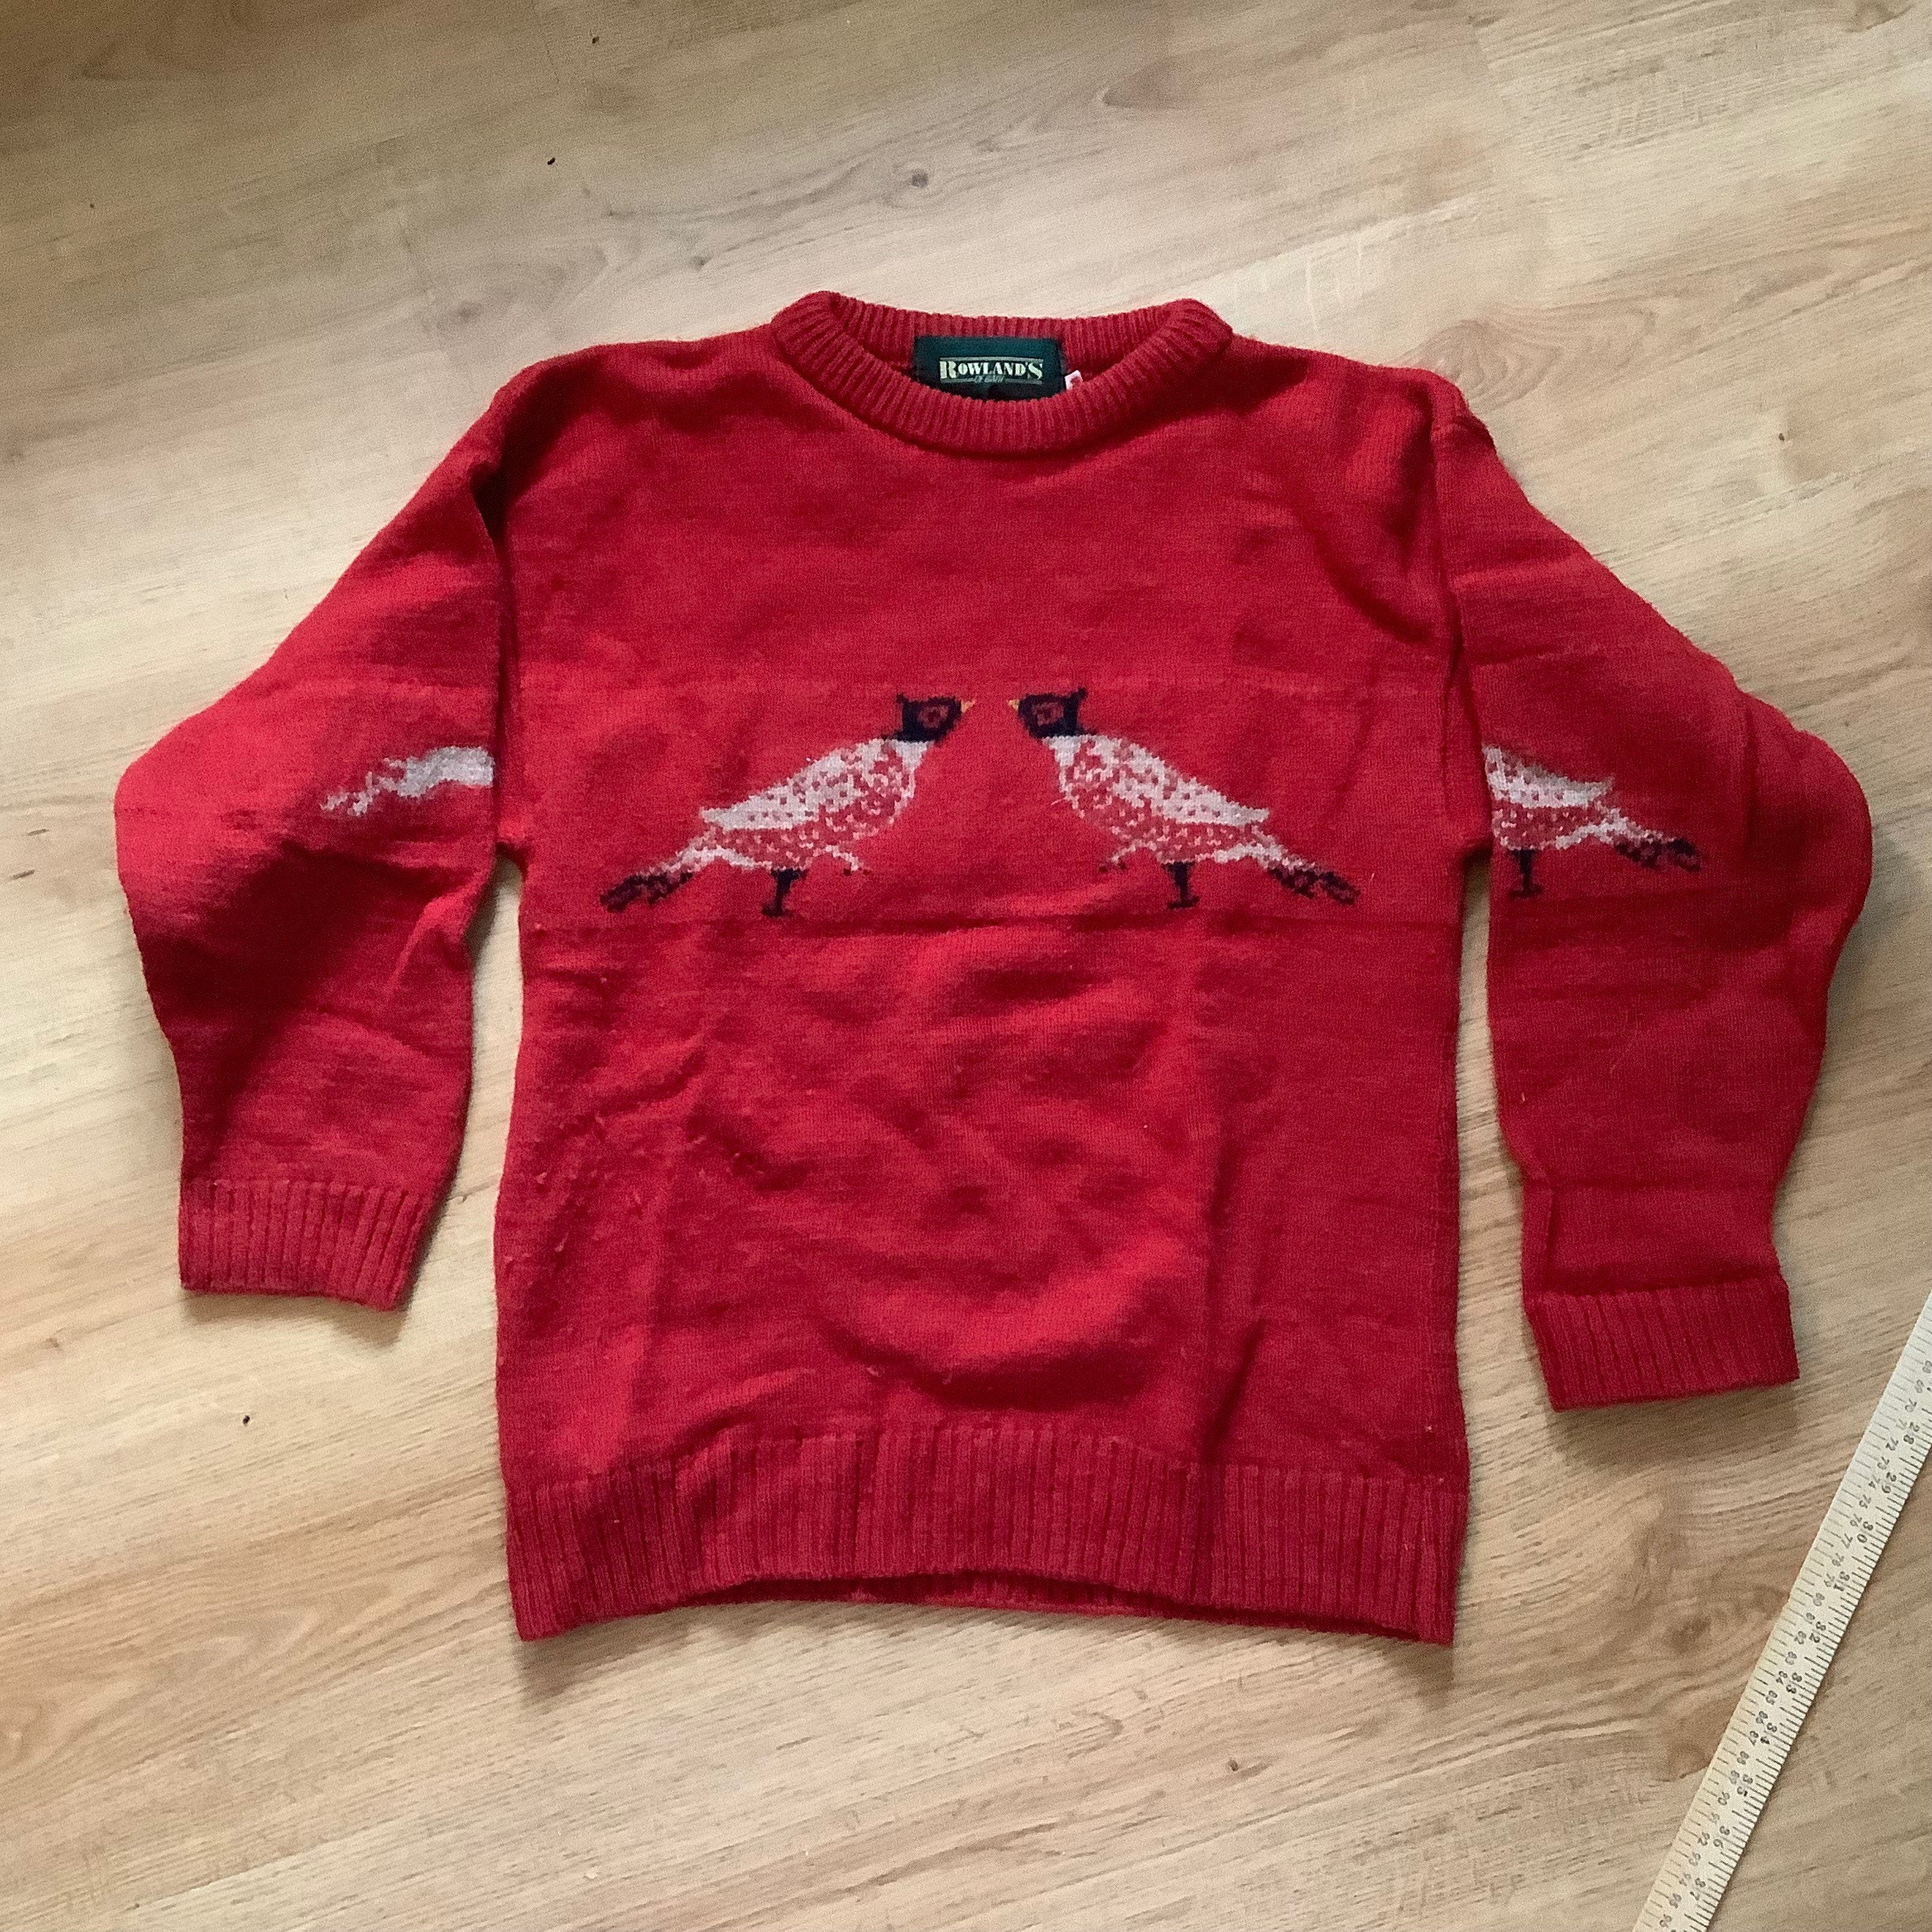 Fishing Ugly Sweater -  Canada